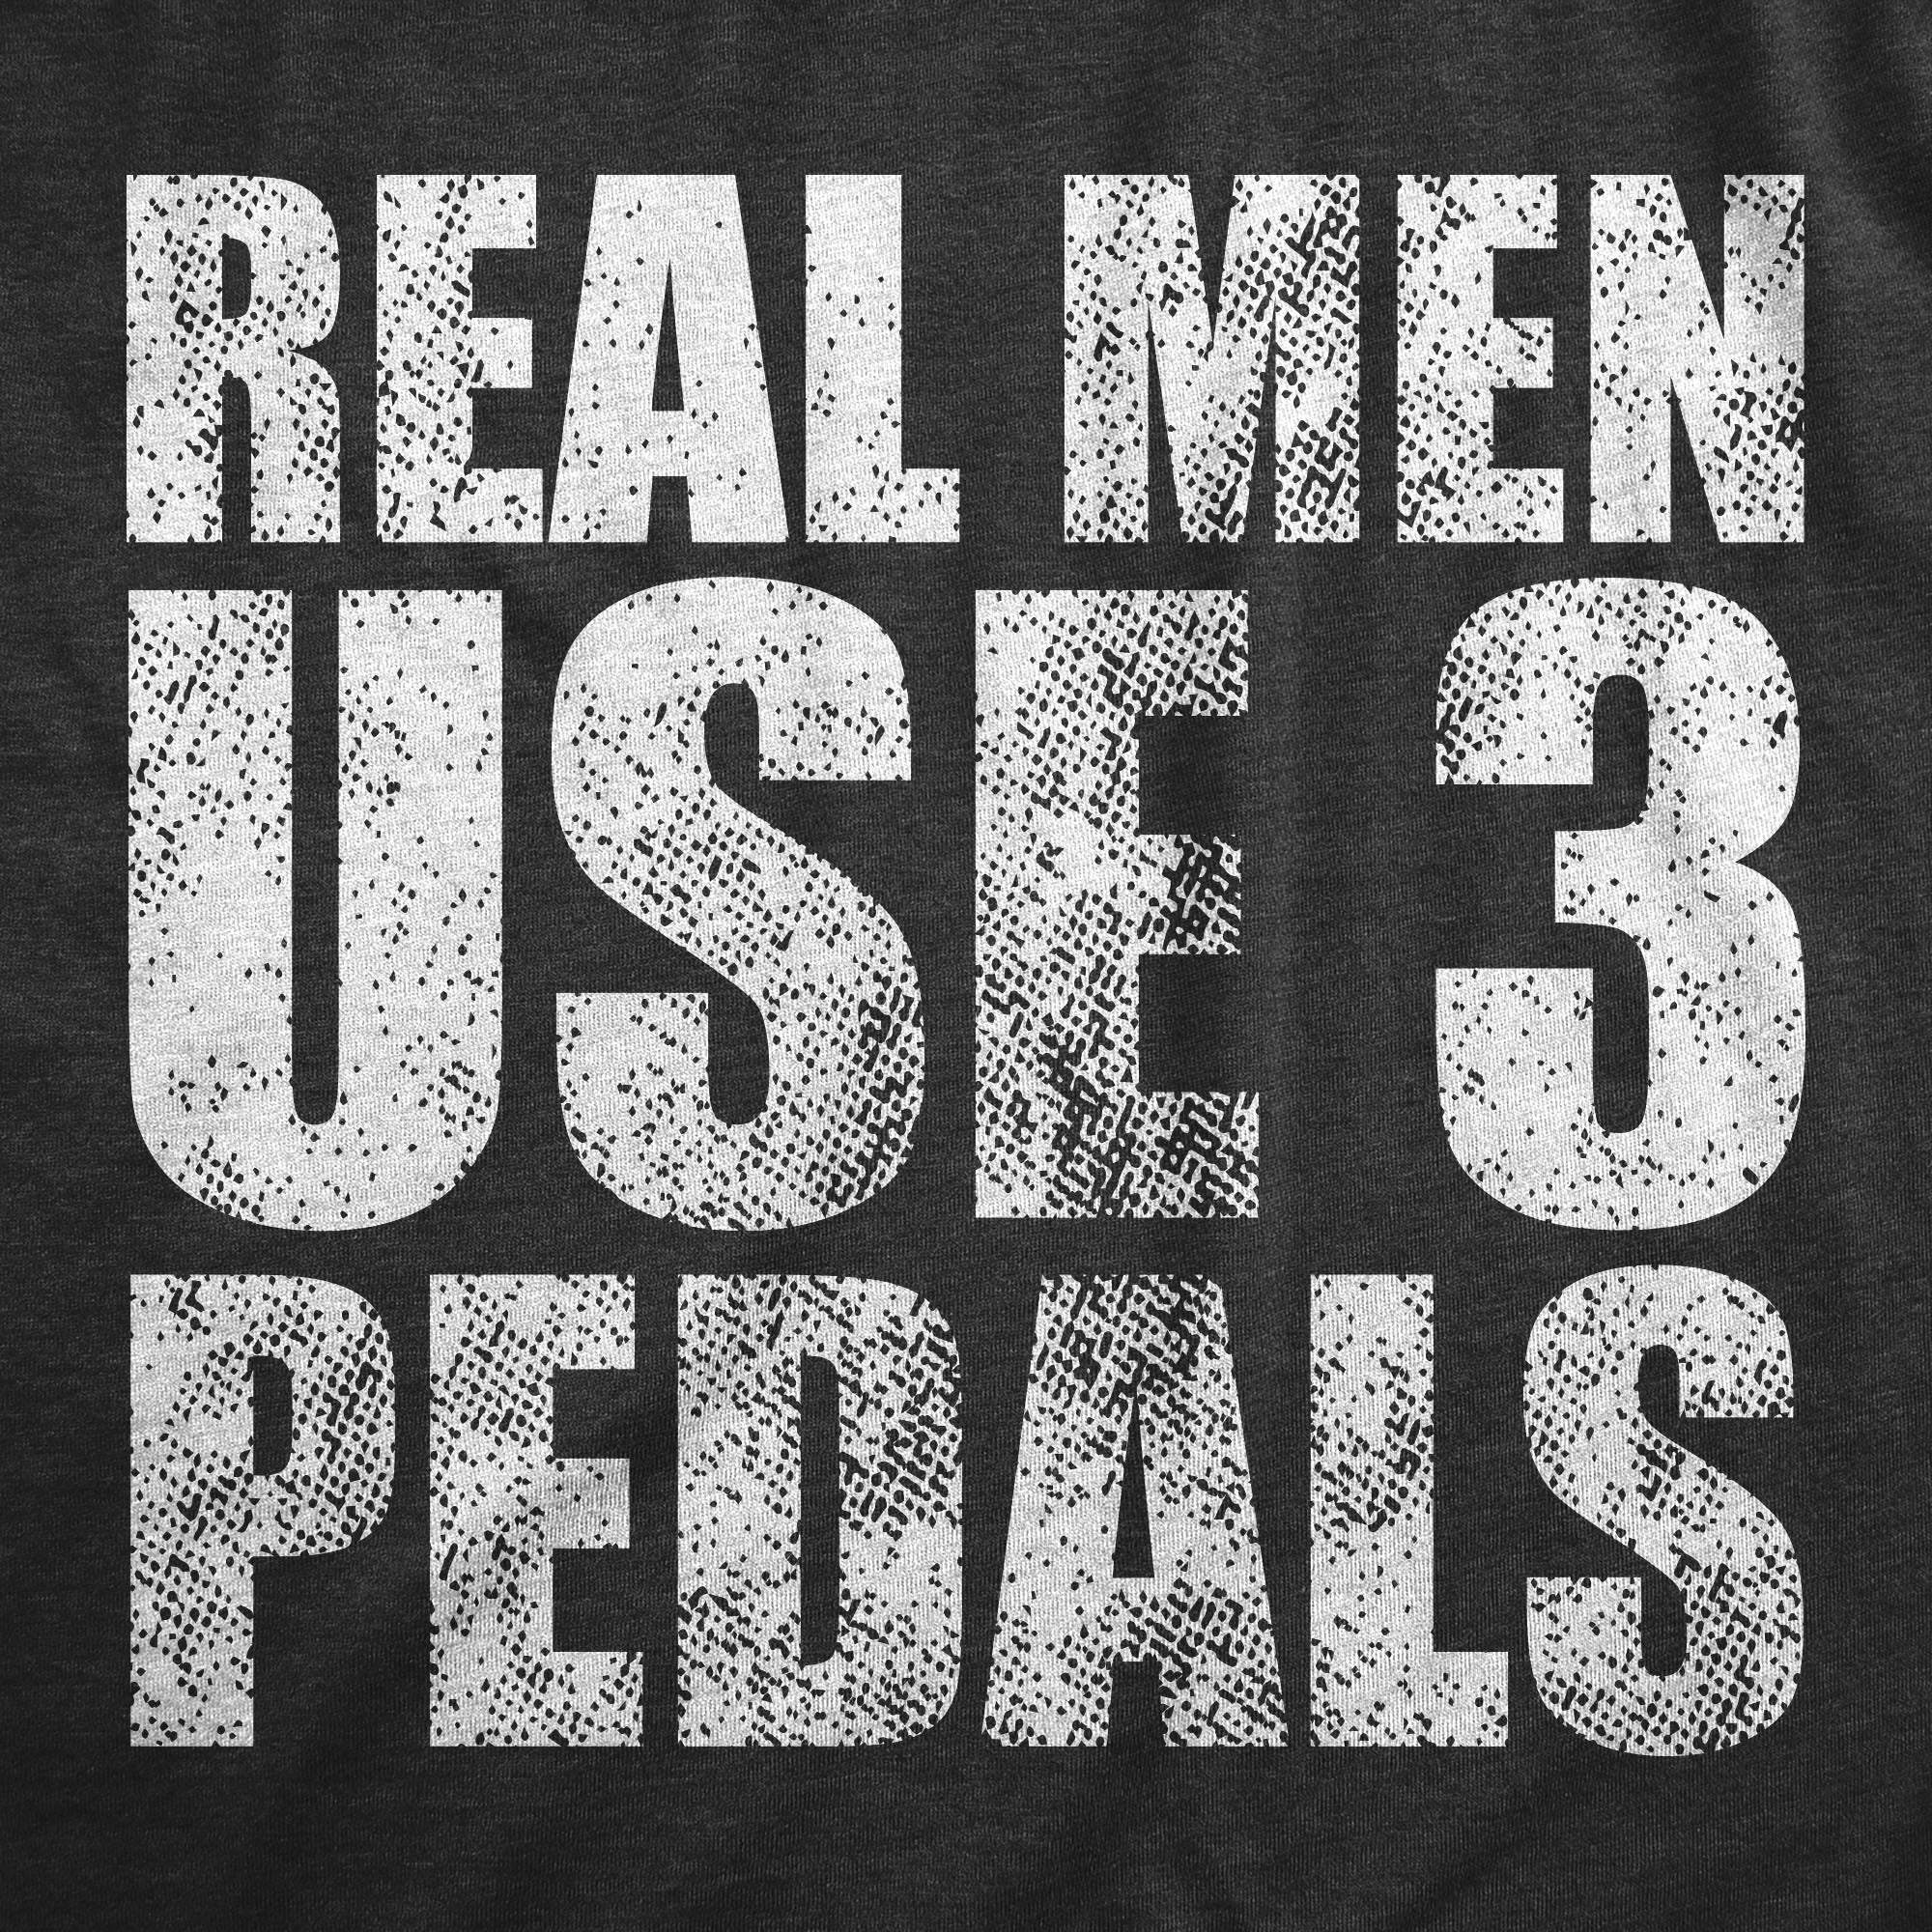 Funny Heather Black Real Men Use 3 Pedals Mens T Shirt Nerdy Mechanic Tee